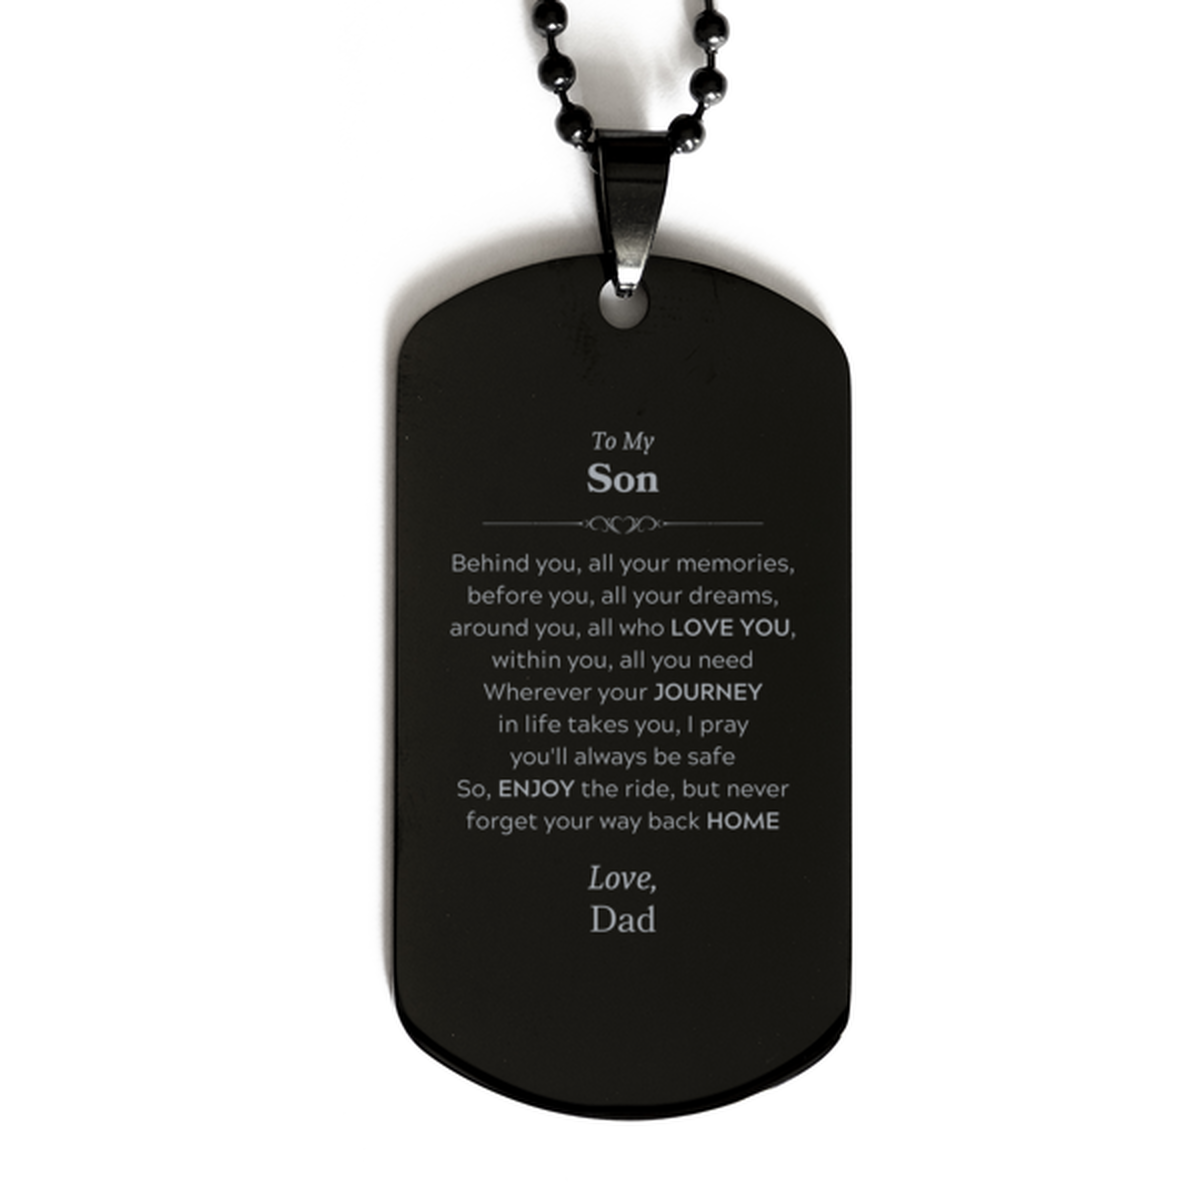 To My Son Graduation Gifts from Dad, Son Black Dog Tag Christmas Birthday Gifts for Son Behind you, all your memories, before you, all your dreams. Love, Dad